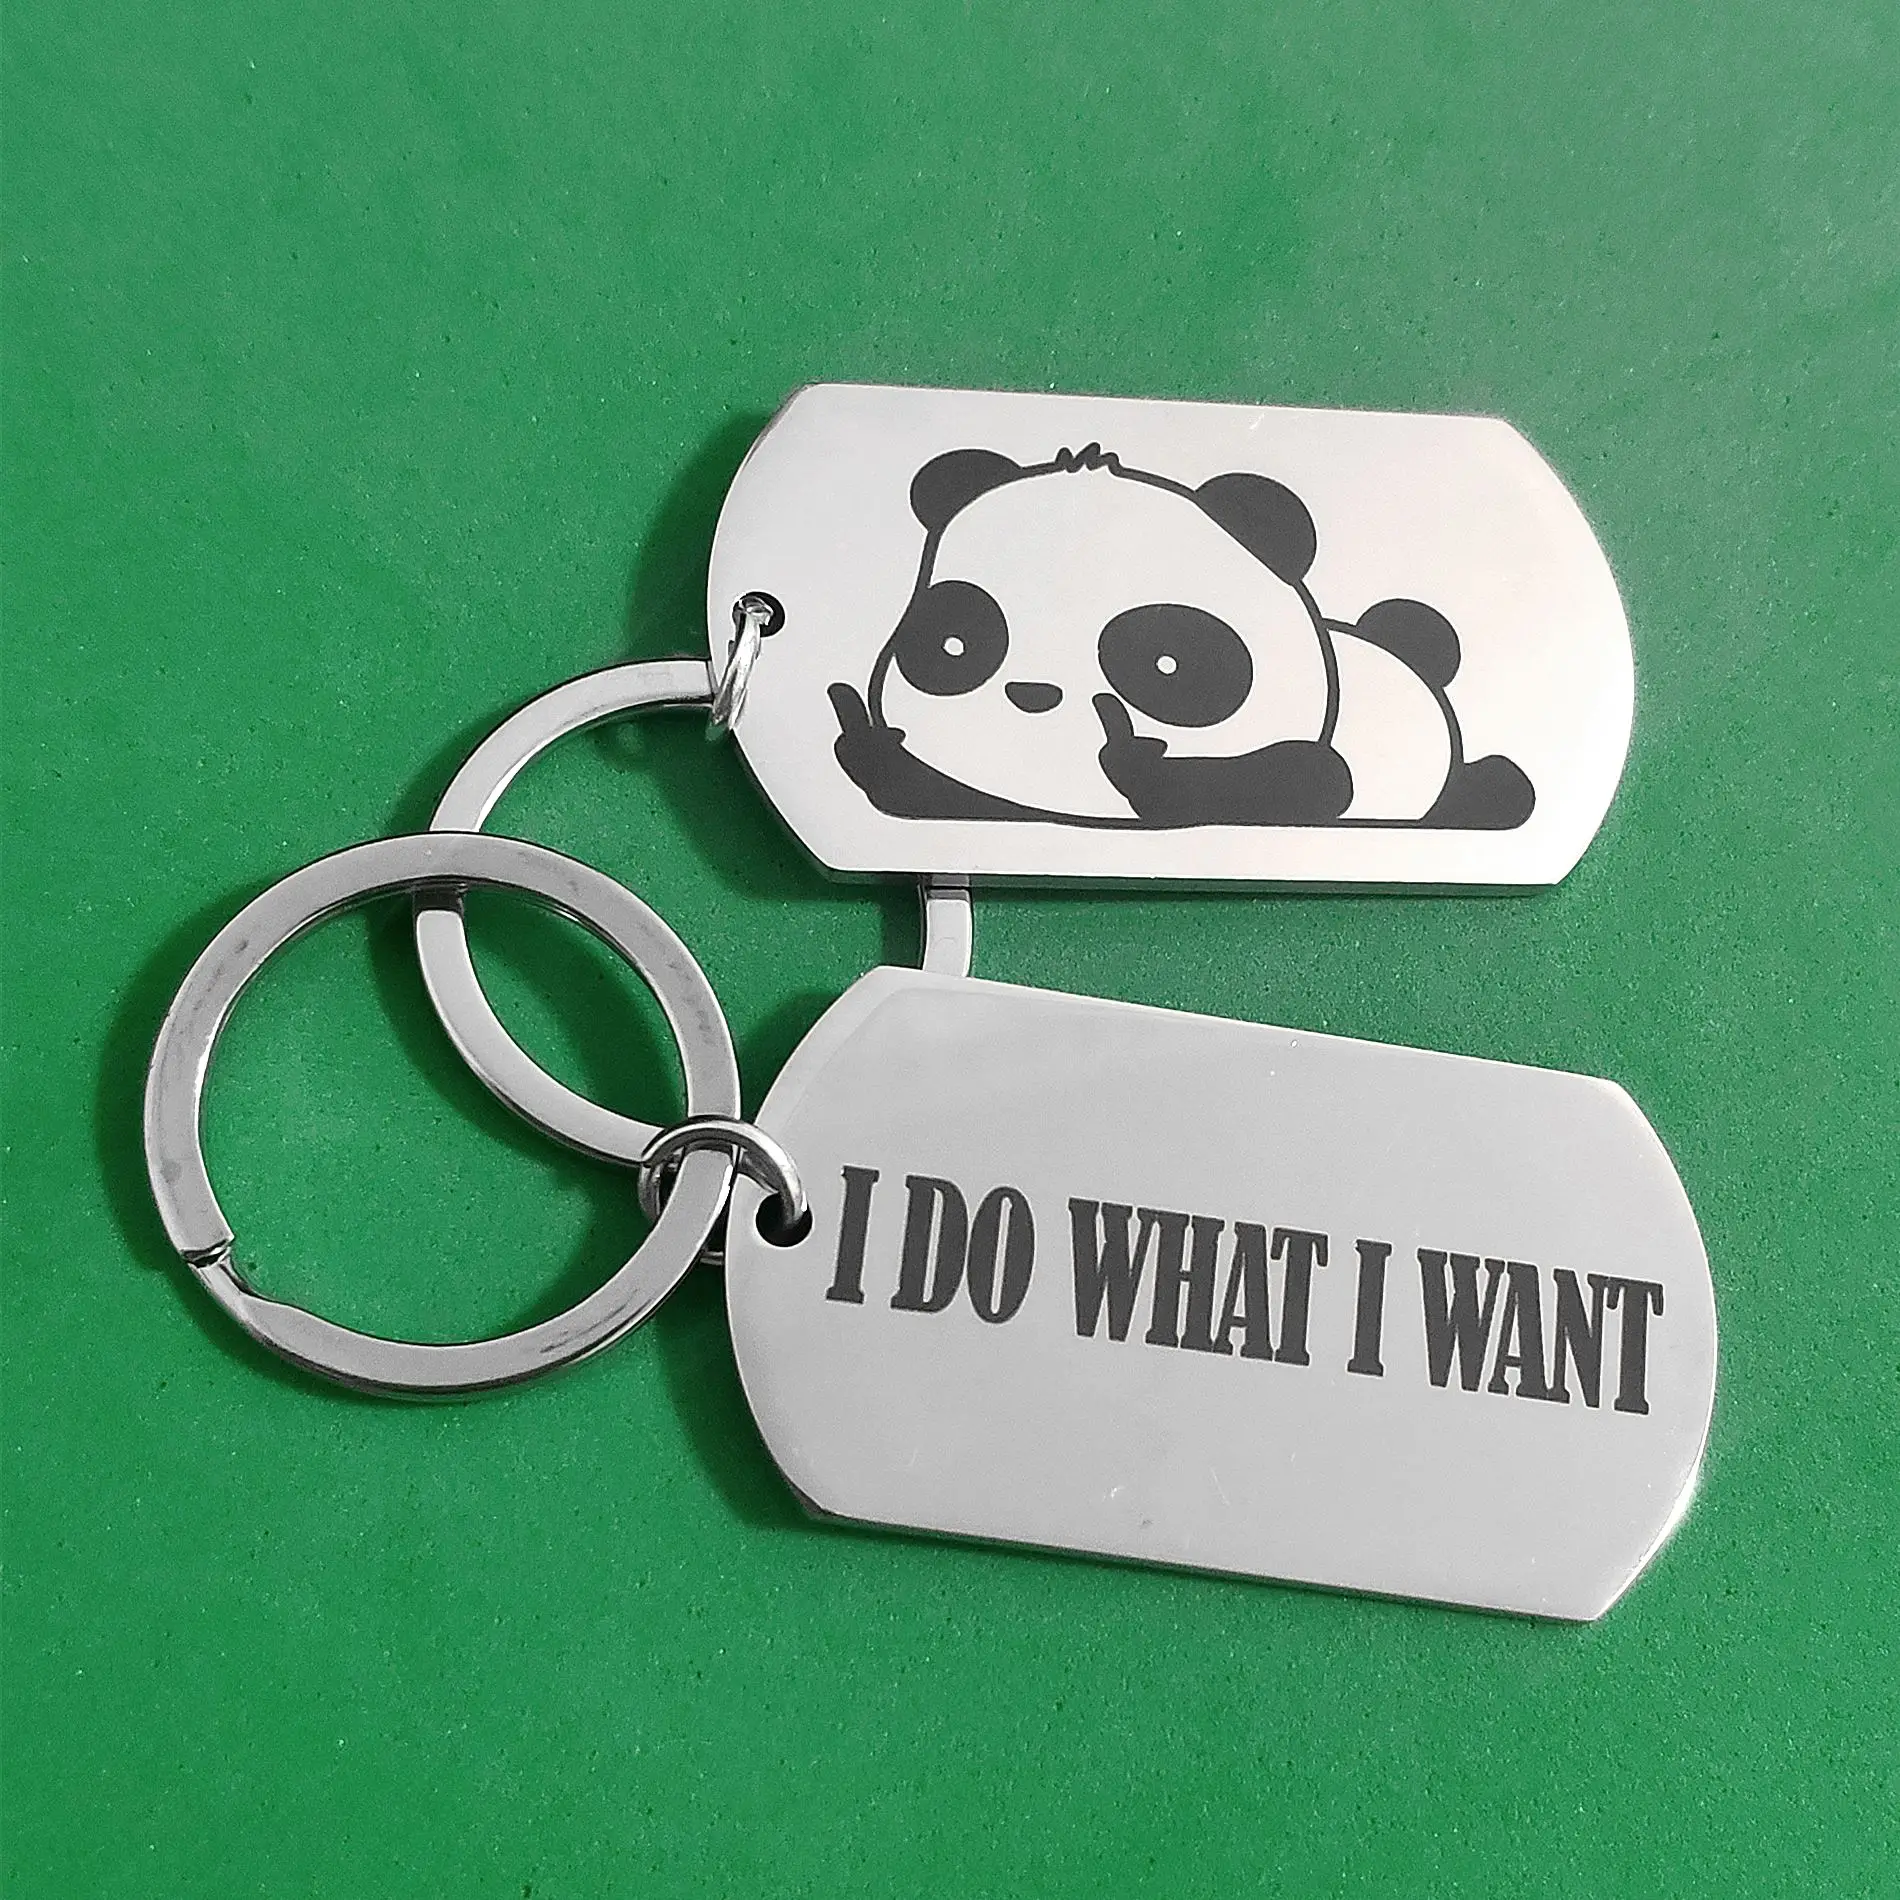 

Keyring Stainless Steel Keychain for Car Keys I DO WHAT I WANT Panda Cartoon Cute Gift Military Tags Creative Carabiner Holder